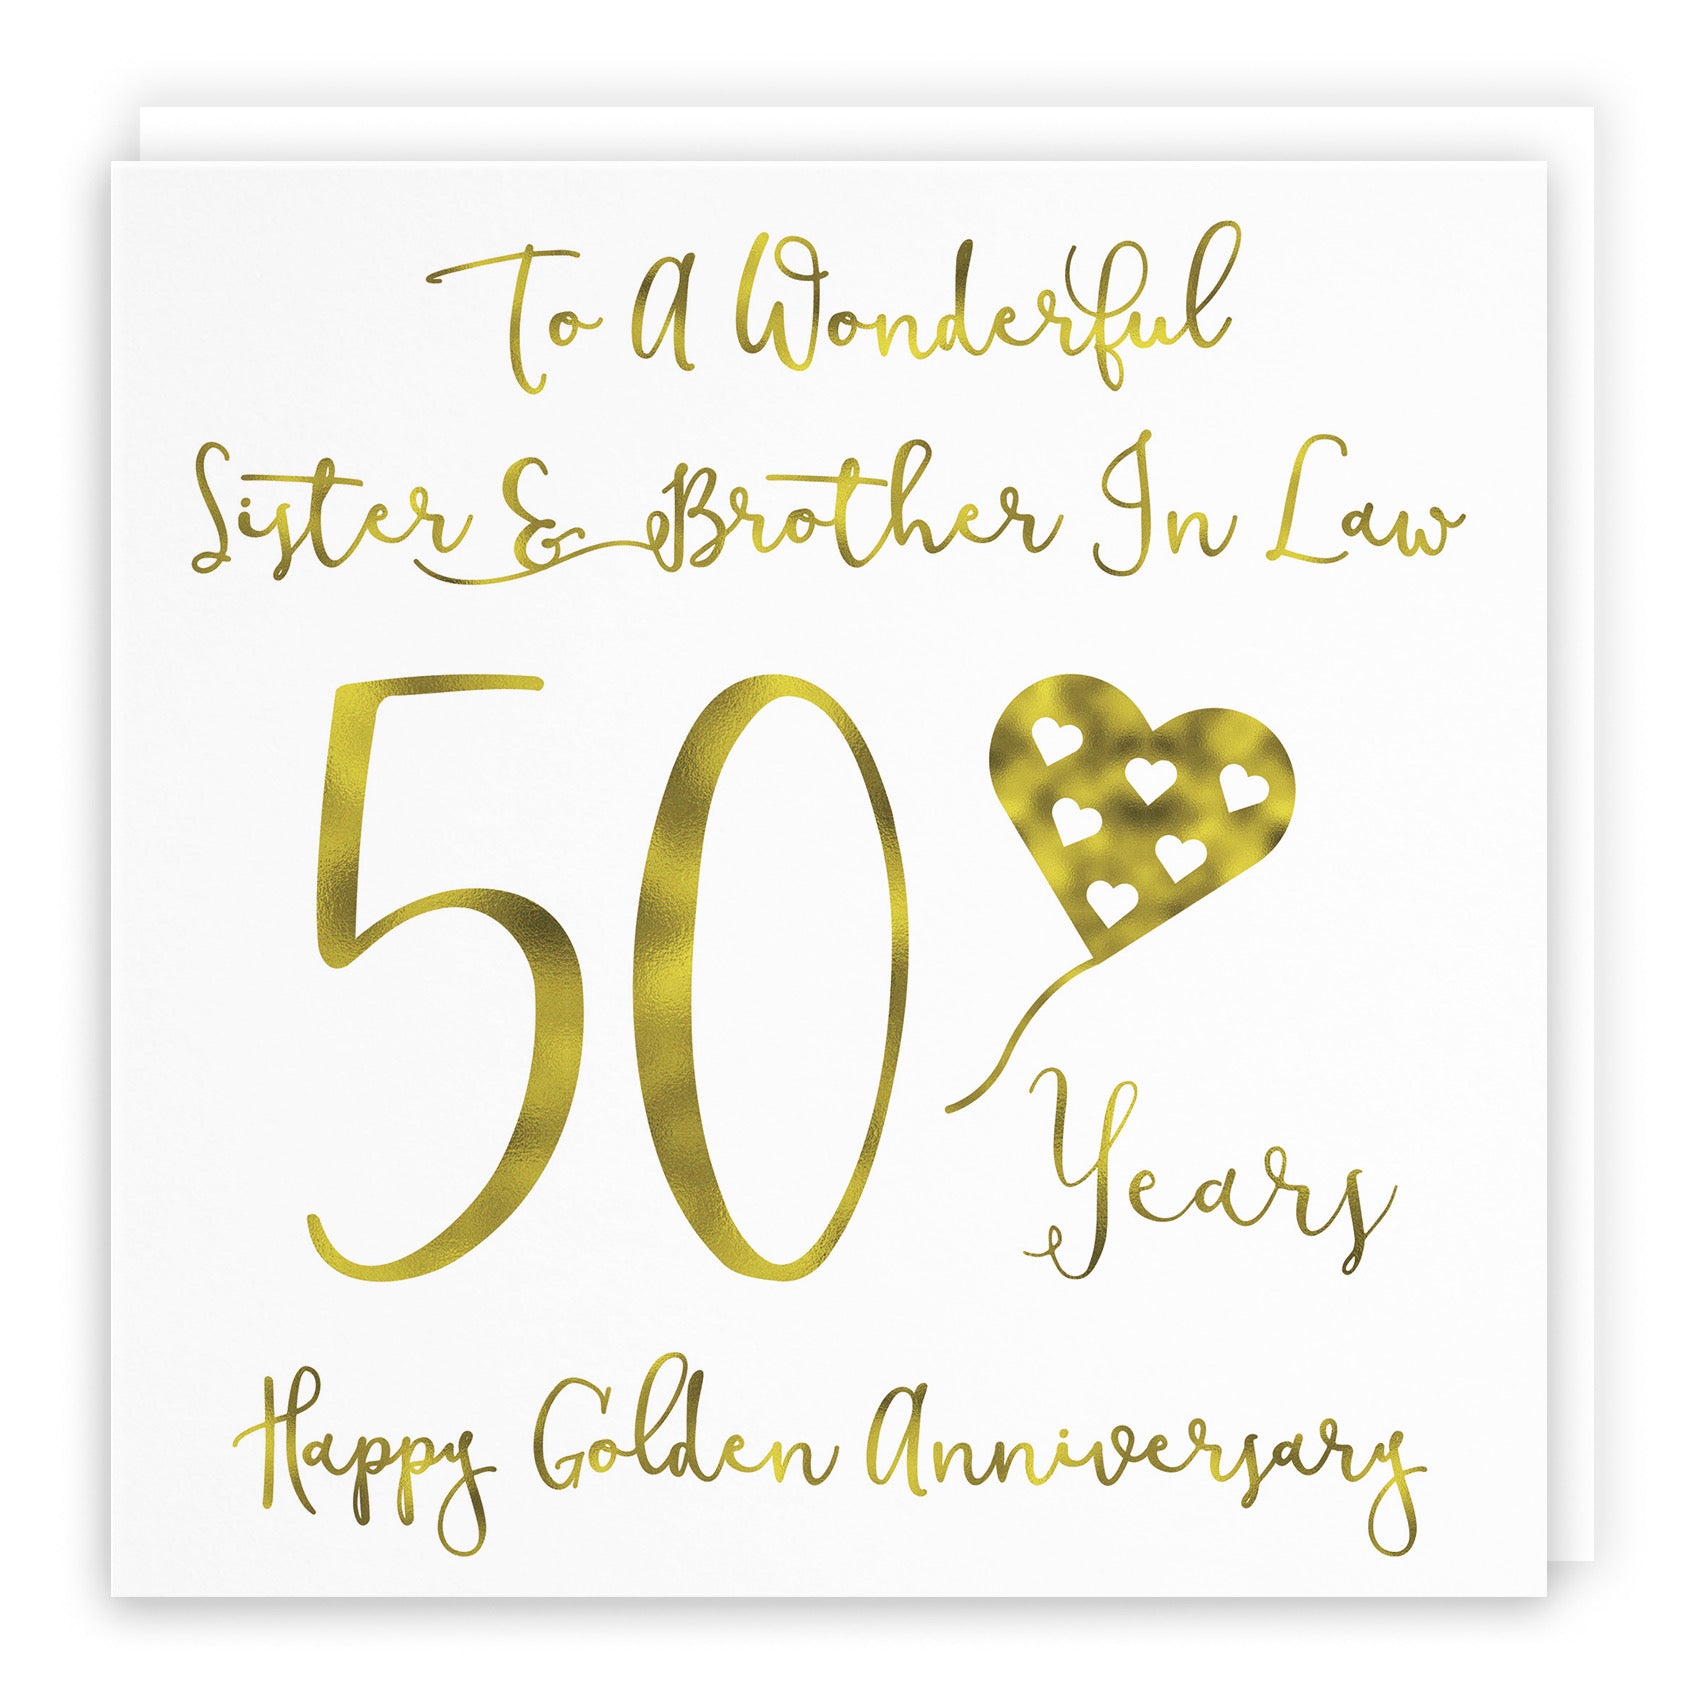 Large Sister And Brother In Law 50th Anniversary Card Milano - Default Title (B0BBRWZQJ8)